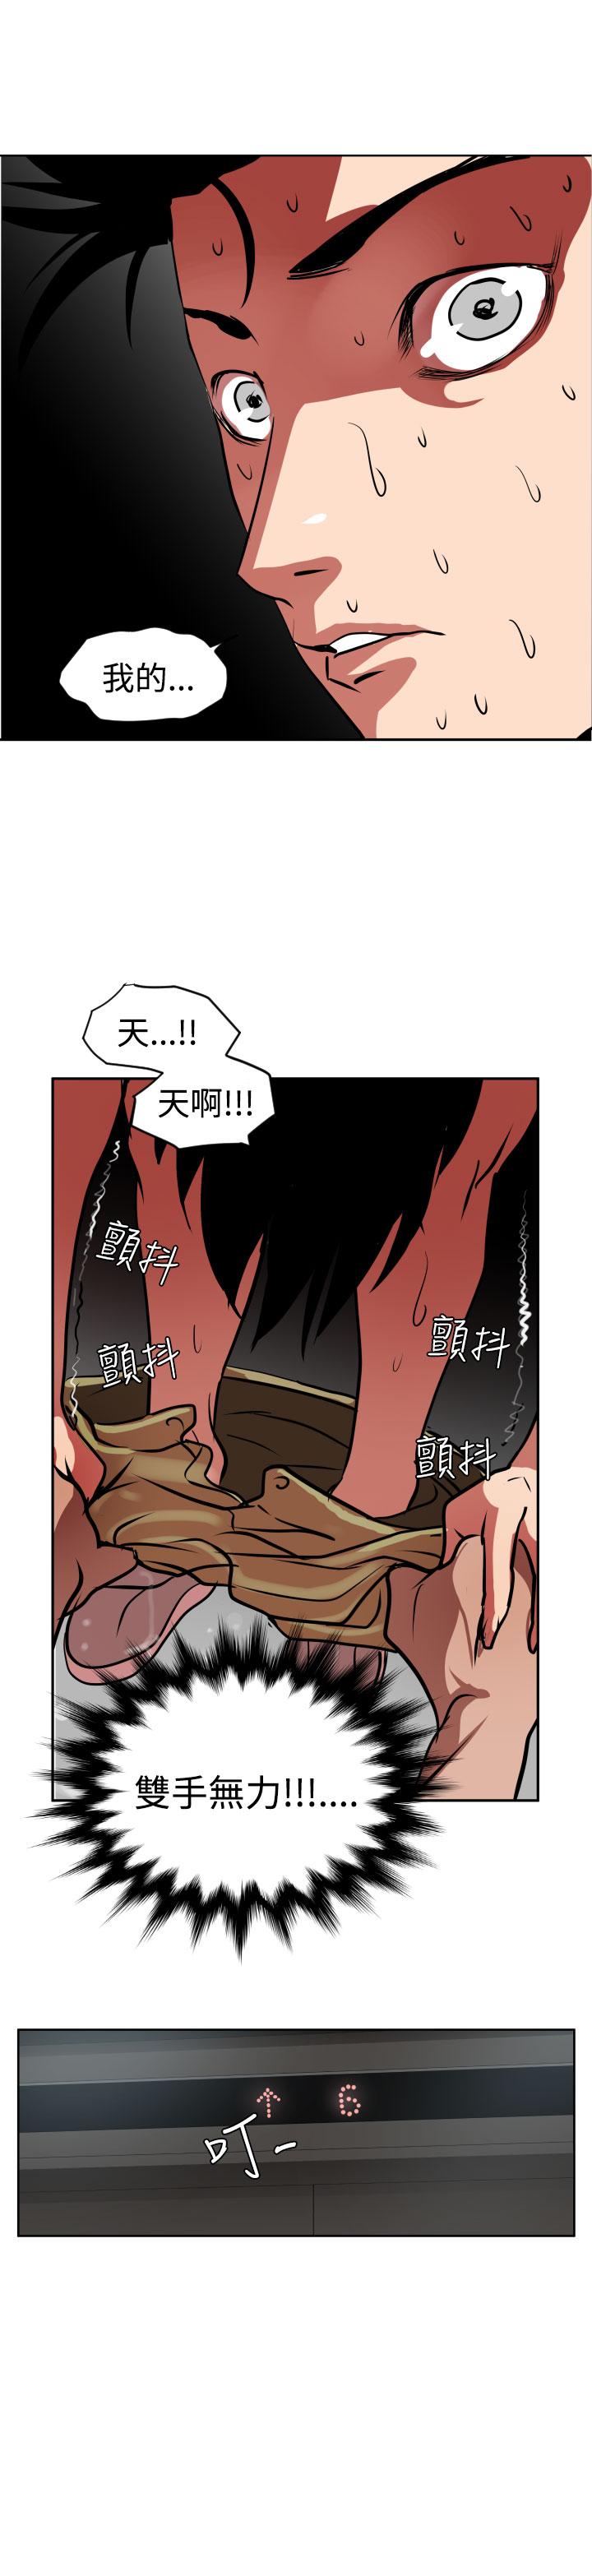 Desire King (慾求王) Ch.1-12 (chinese) 426